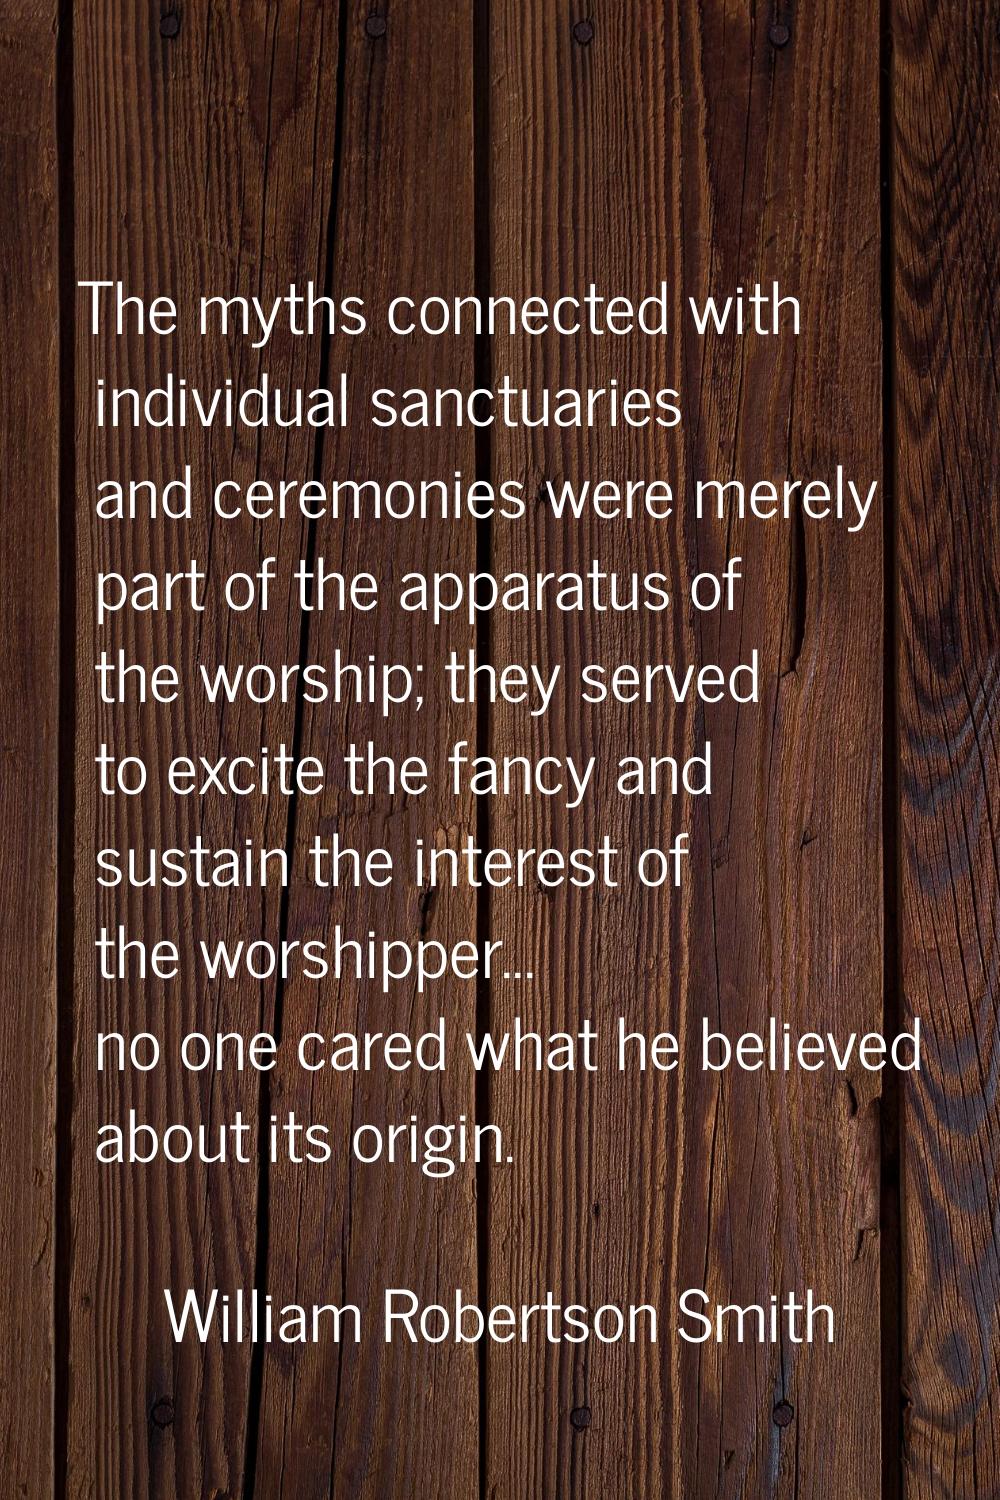 The myths connected with individual sanctuaries and ceremonies were merely part of the apparatus of